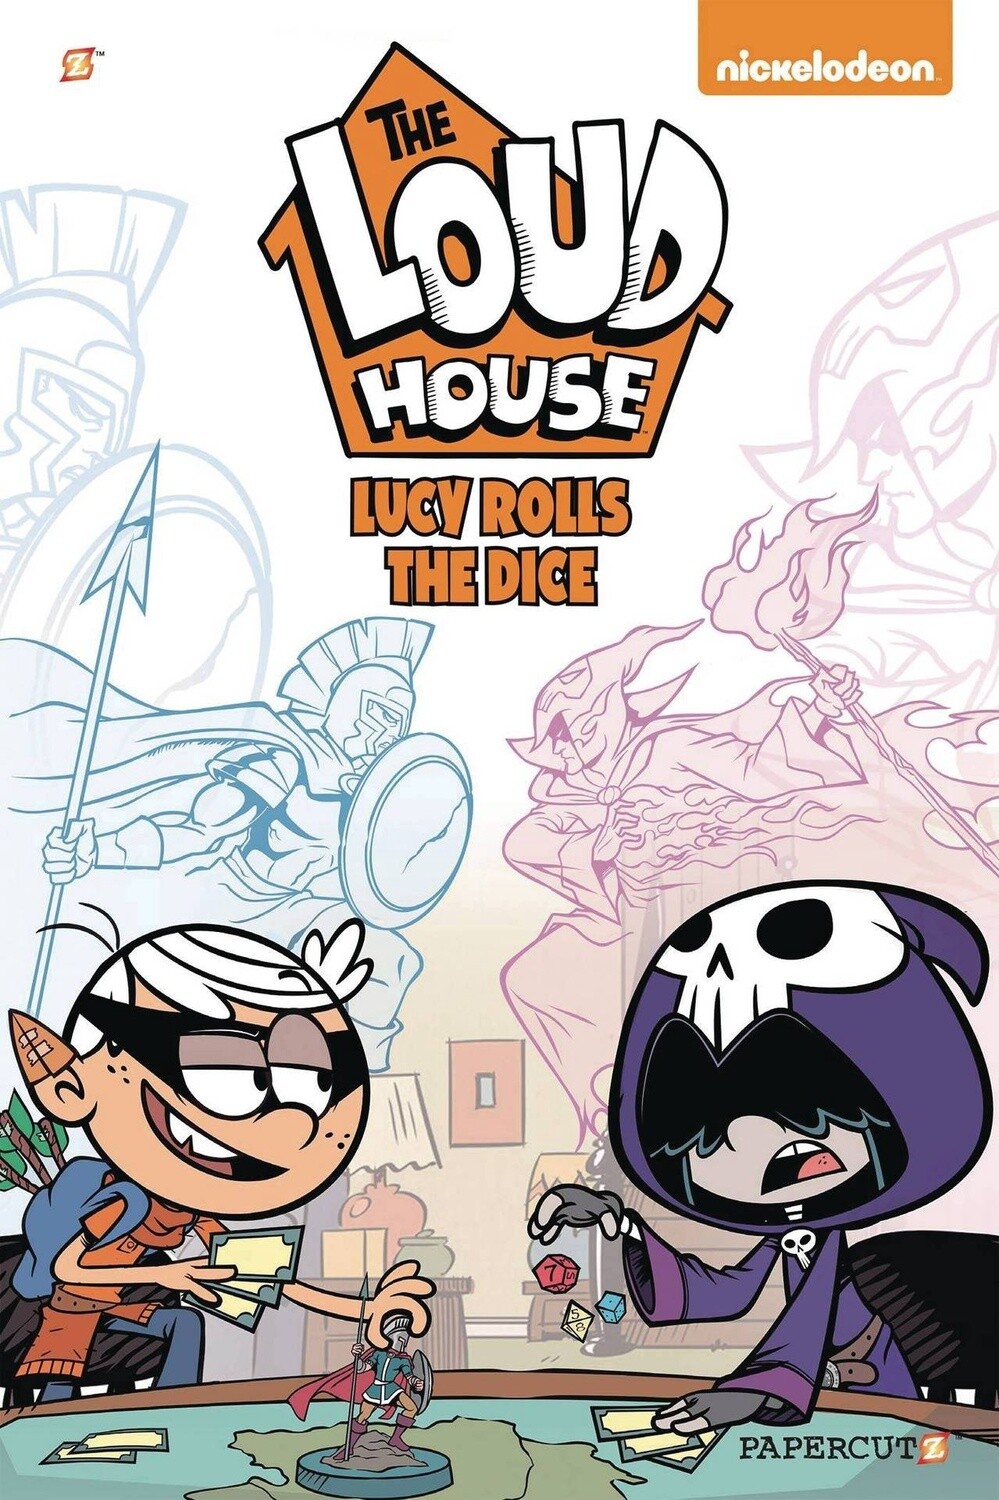 Loud House Vol. 13: Lucy Rolls The Dice